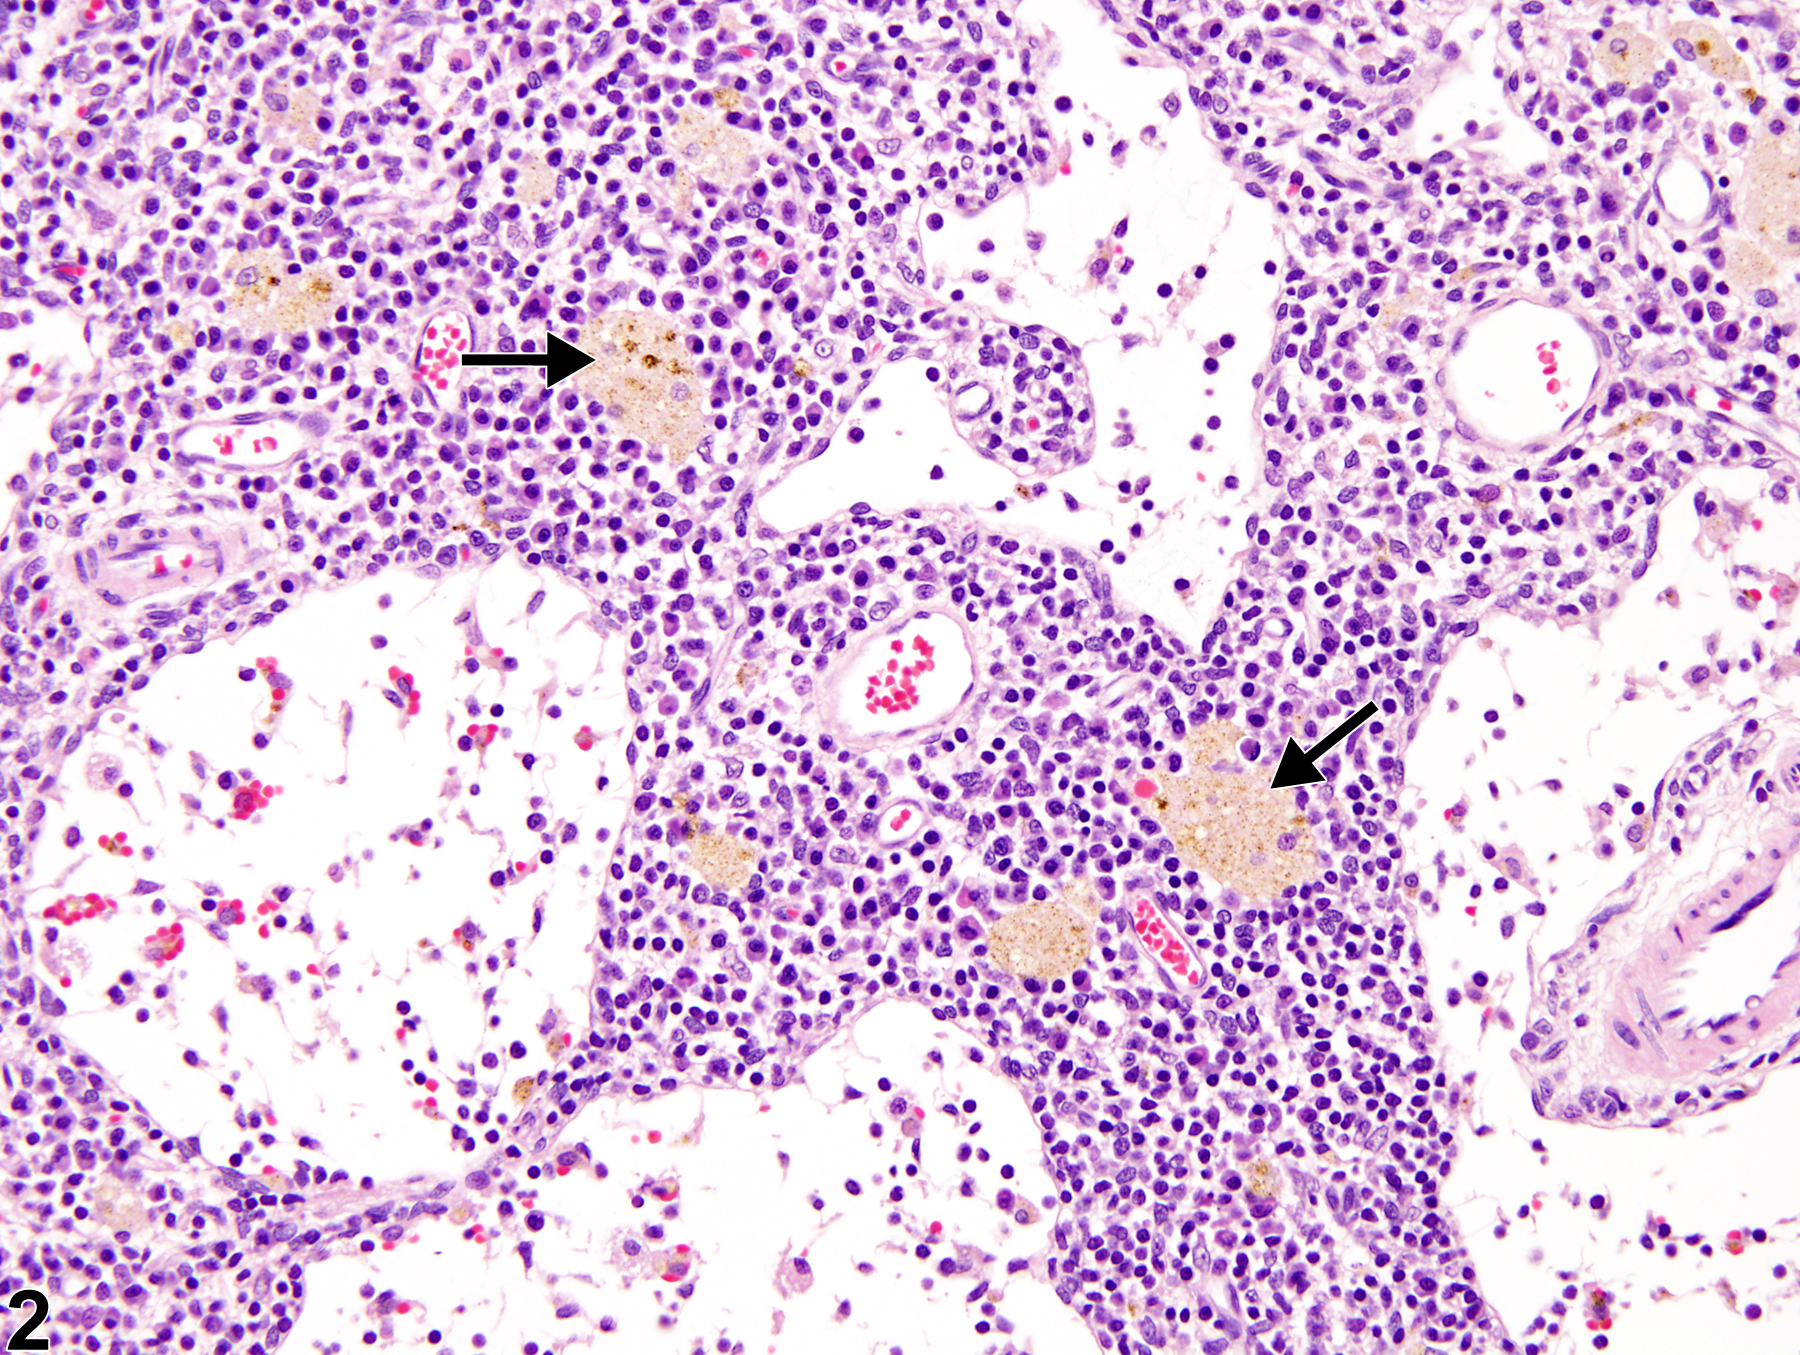 Image of pigment in the lymph node from a male F344/N rat in a chronic study